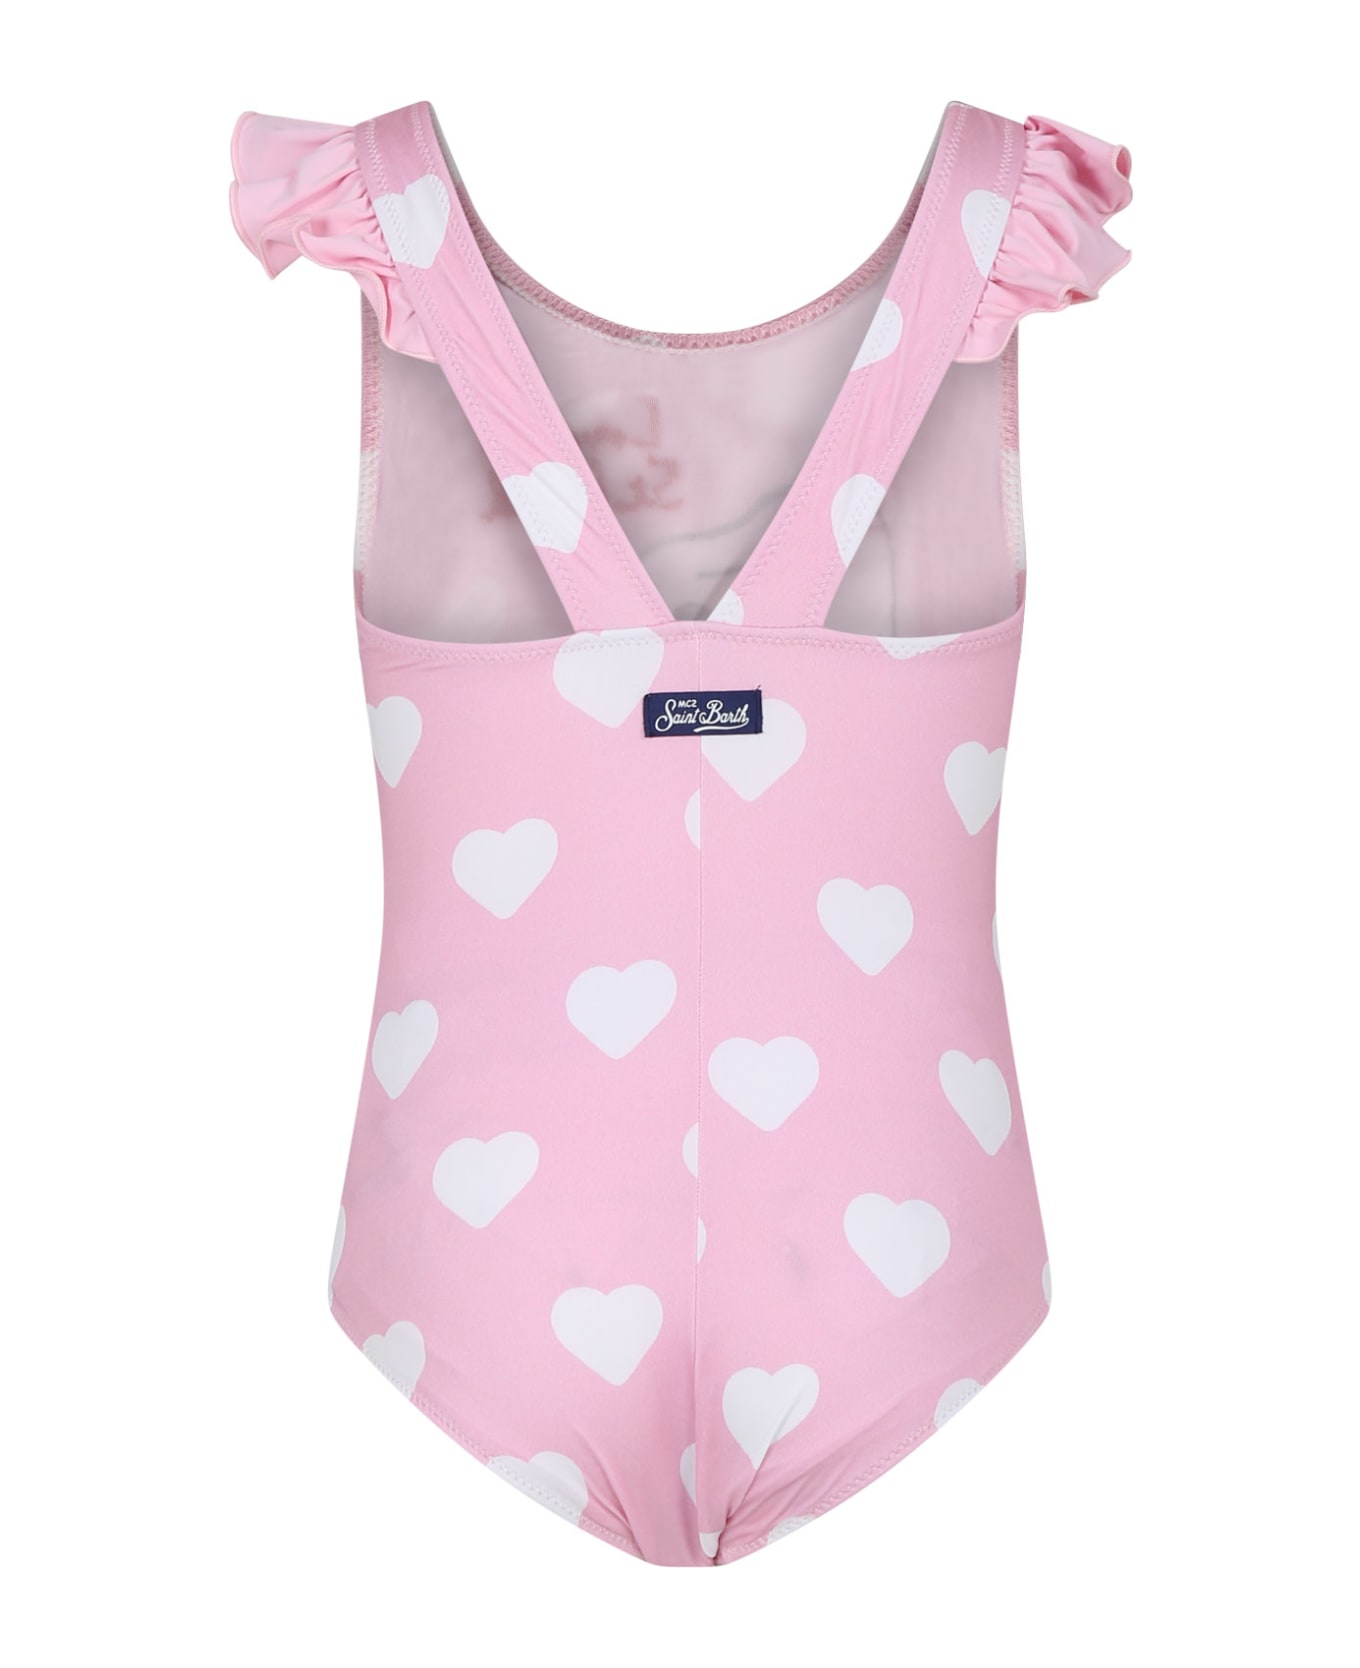 MC2 Saint Barth Pink Swimsuit For Girl With Snoopy - Pink